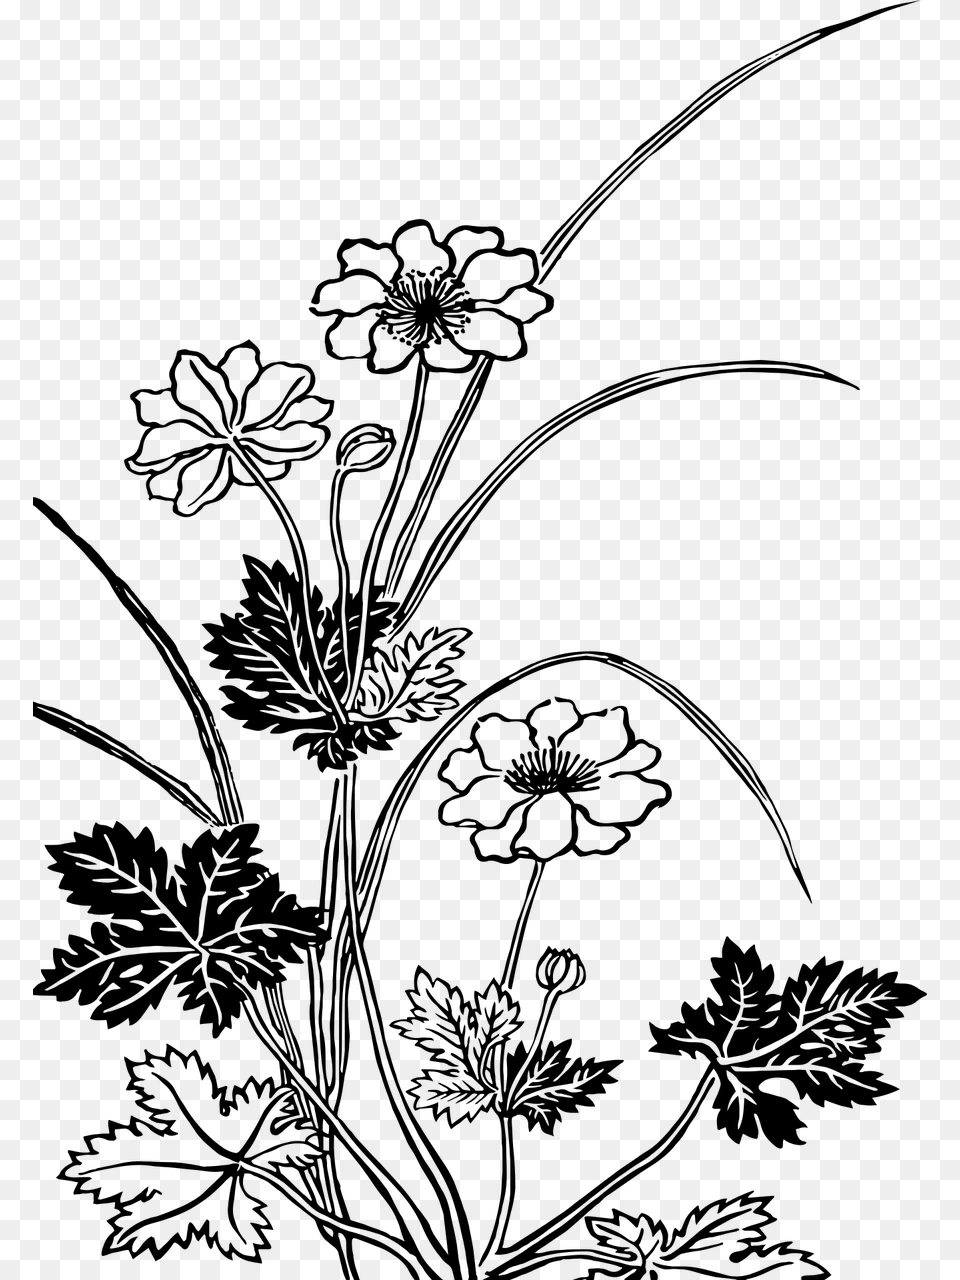 Download Flowering Plants Black And White, Gray Free Png